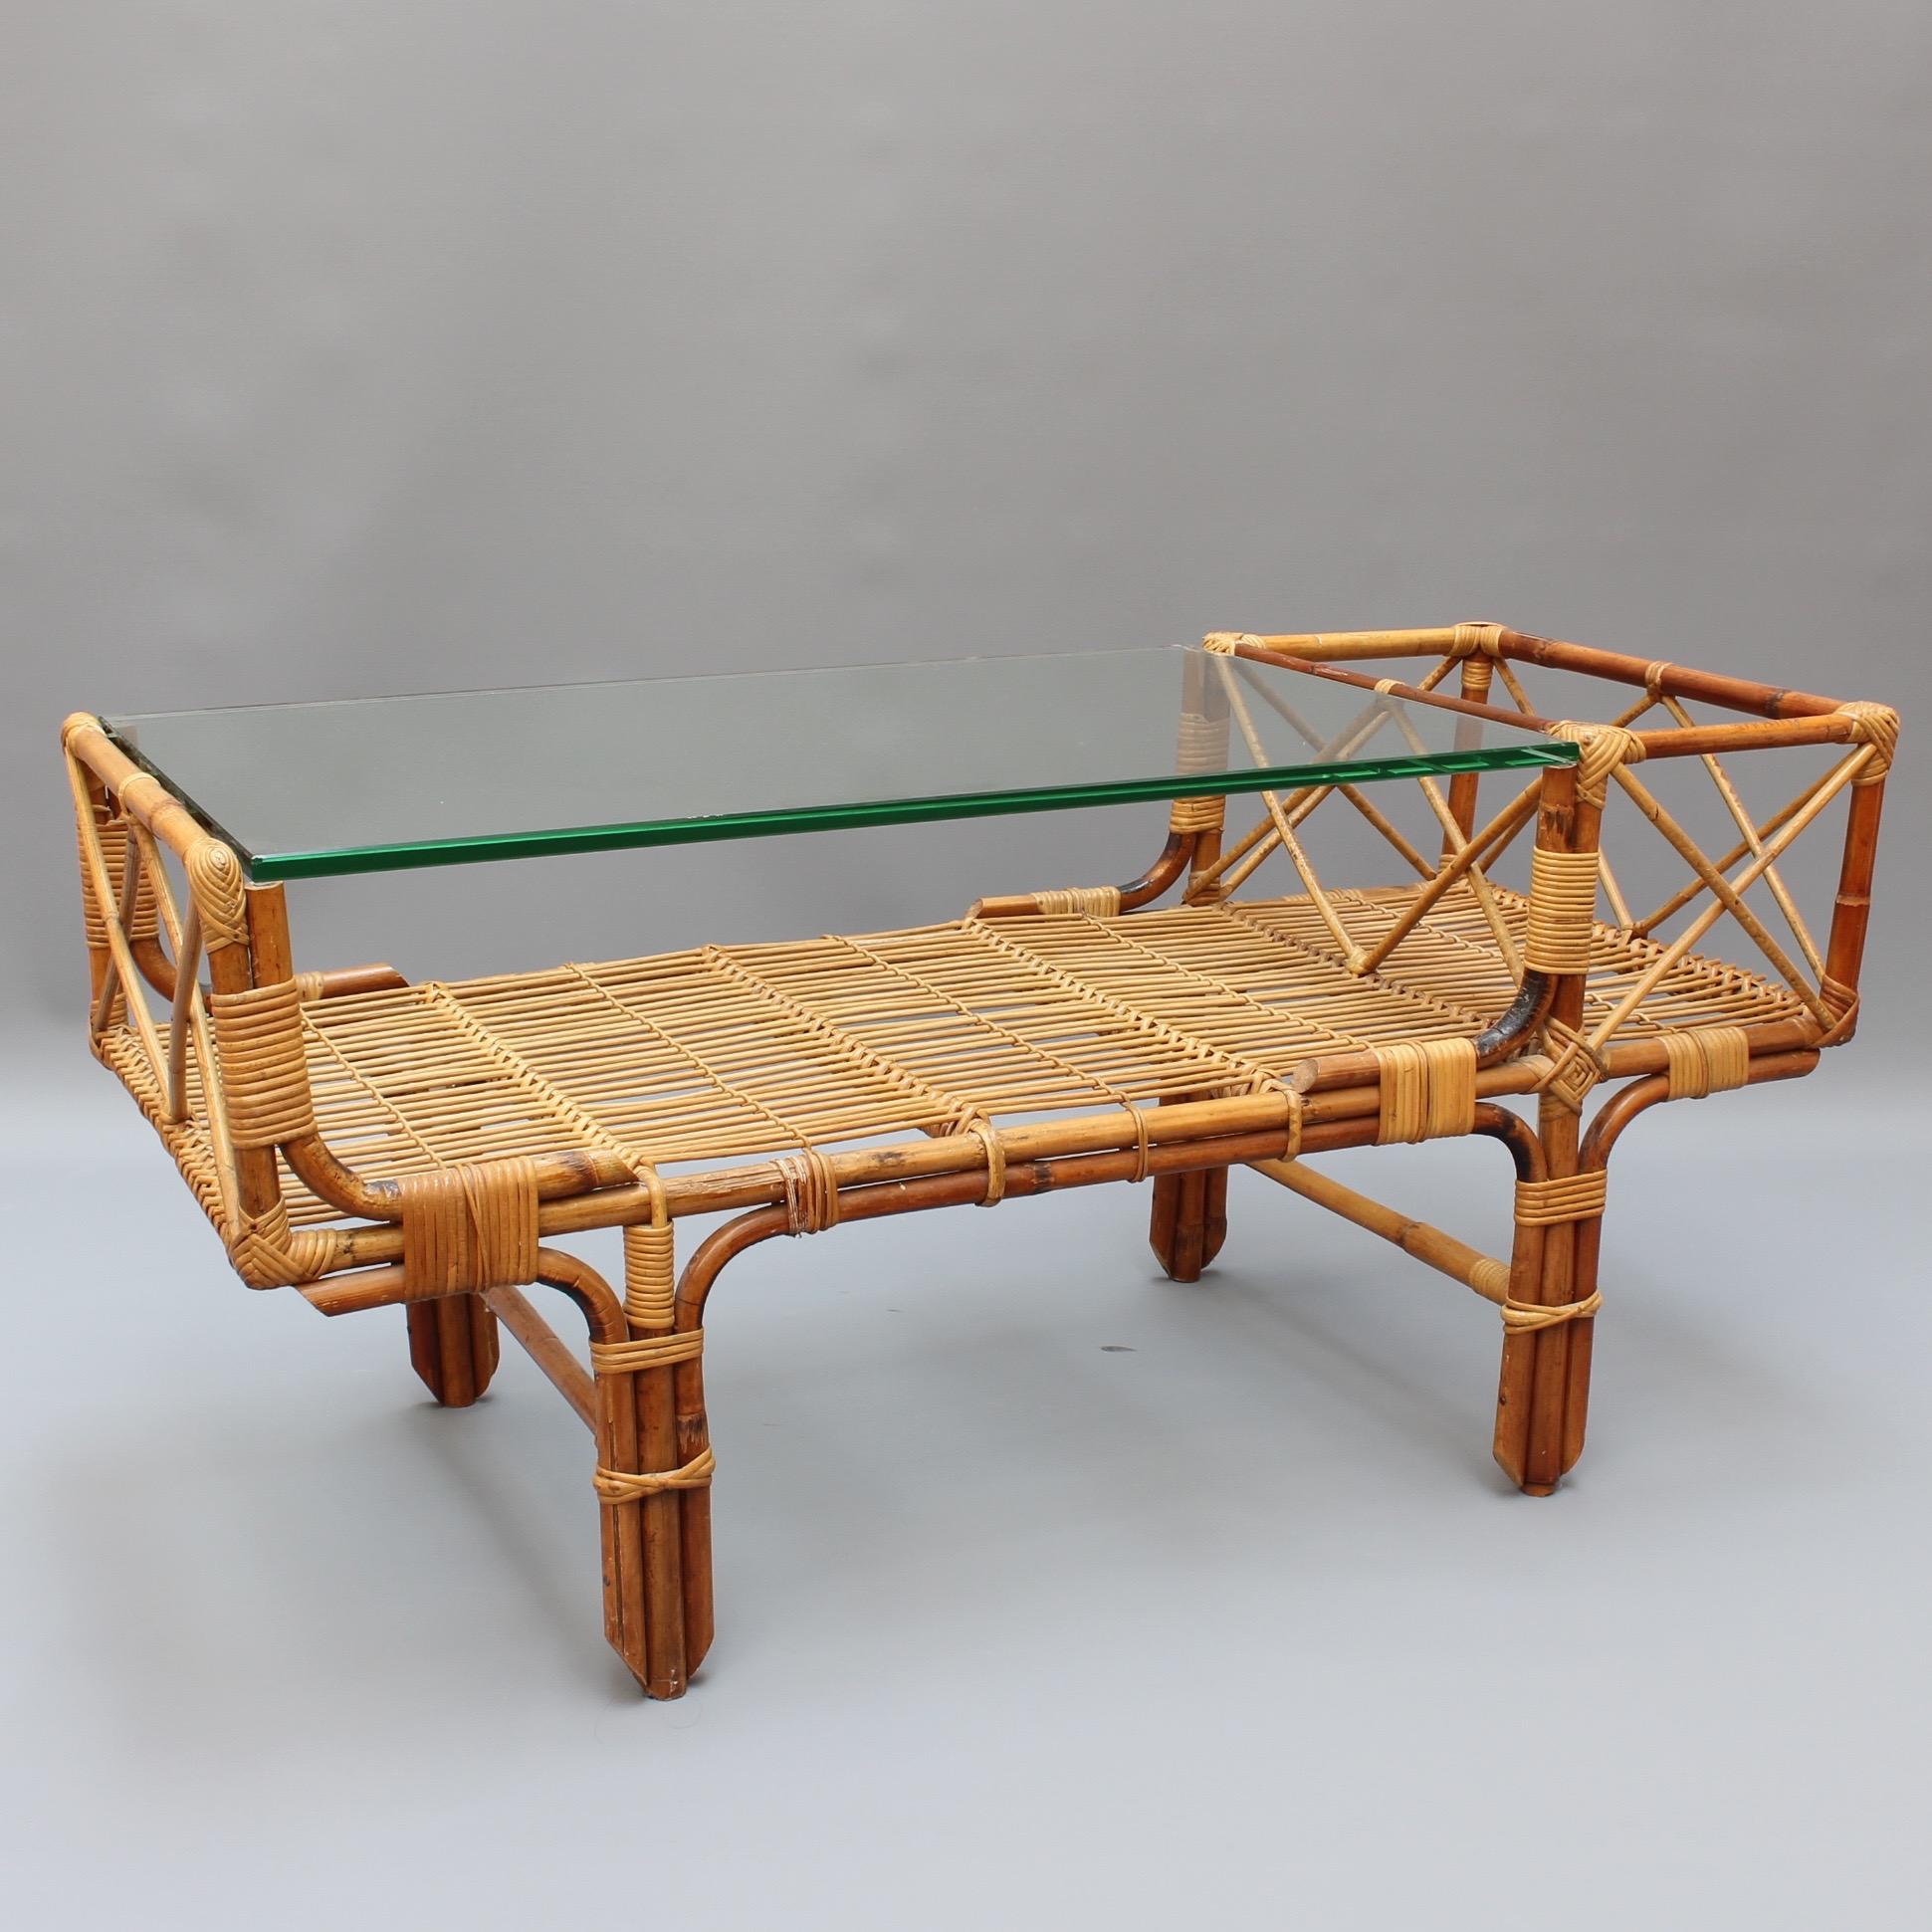 Vintage Italian bamboo and rattan glass coffee table, circa 1960s. This table combines its elements to form an incredibly stylish piece whose past effortlessly connects with today's looks. It is a sizable piece which can complement a diversity of